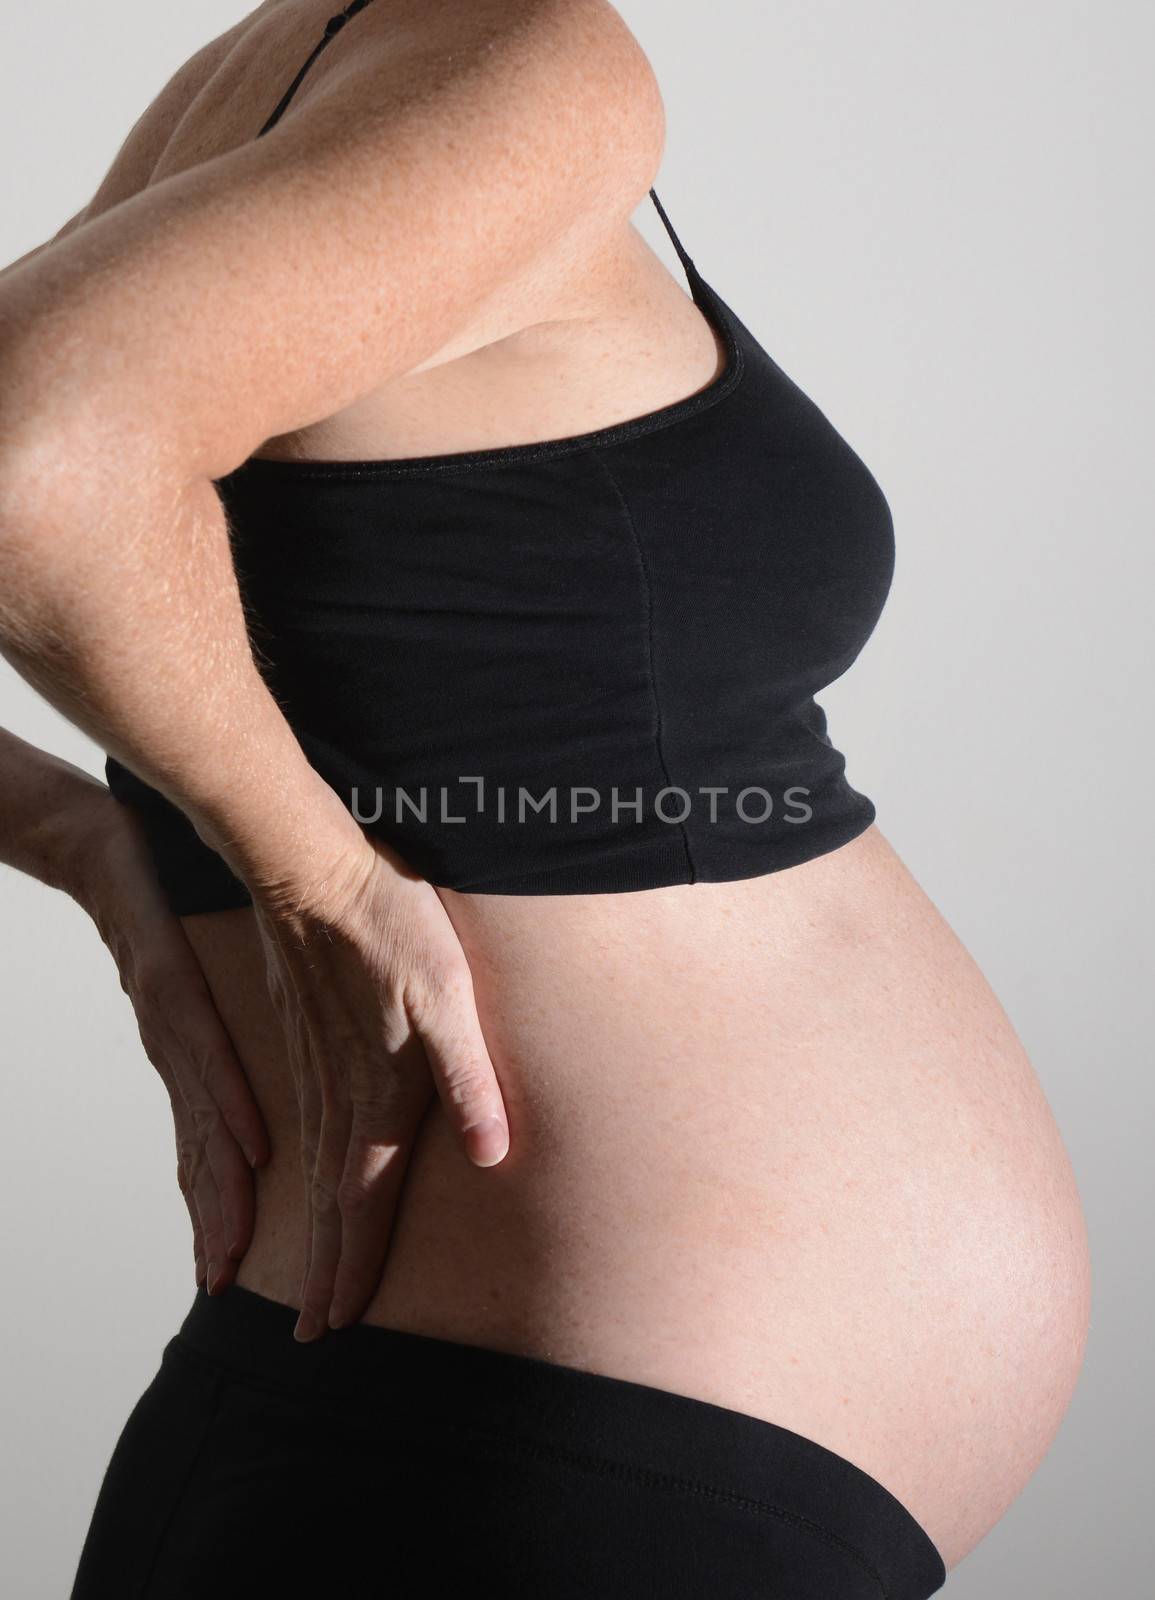 pregnant woman and lower back pain by ftlaudgirl